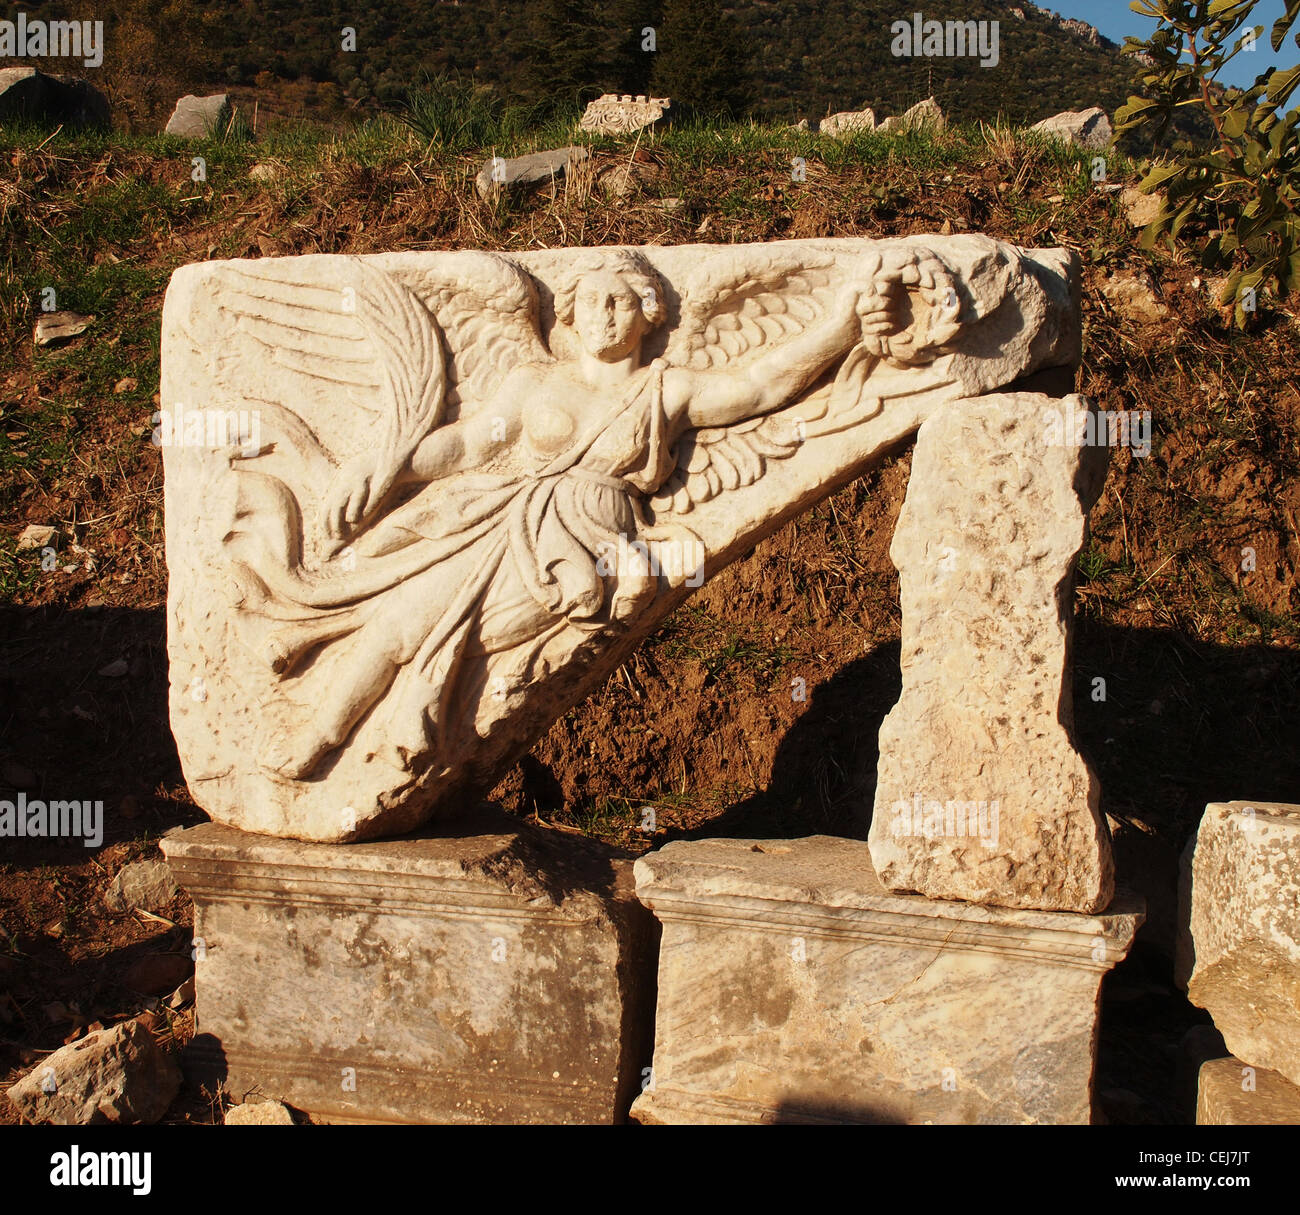 The carved Angel of Victory on a monument in the ancient ruins of Ephesus, Turkey Stock Photo